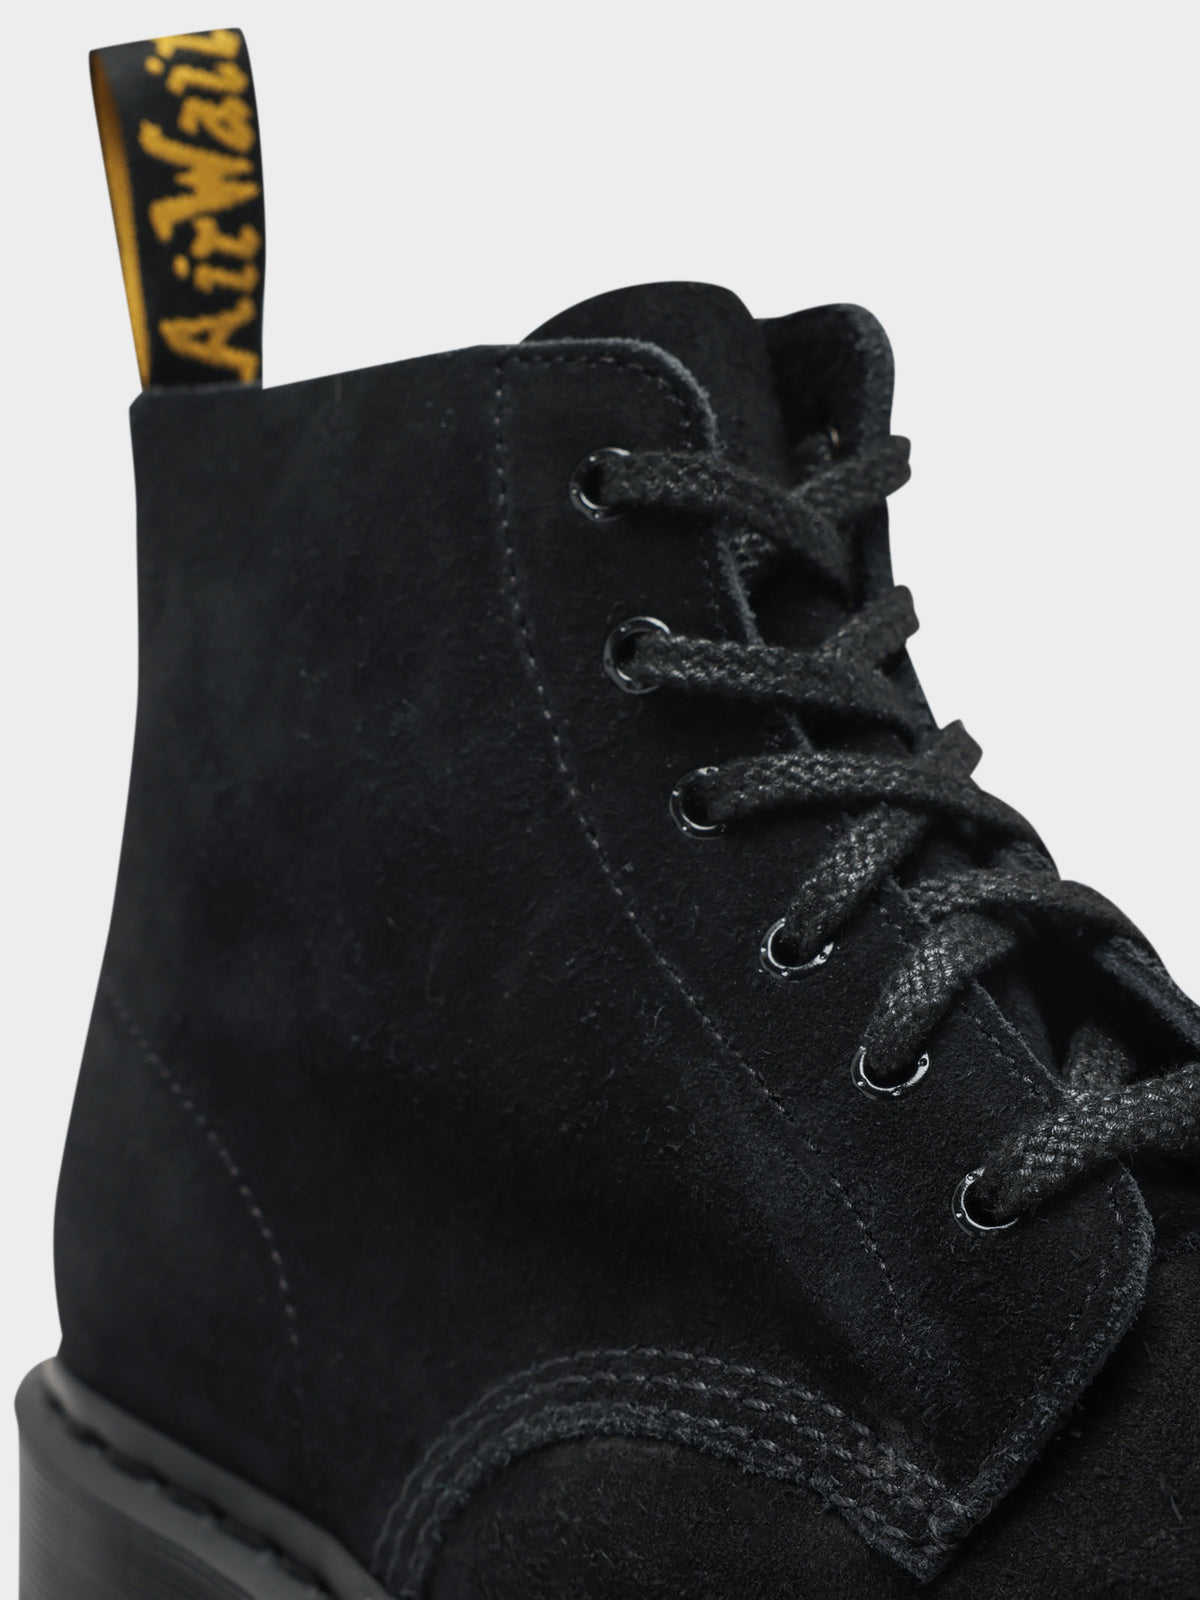 Unisex 101 Mono EH Suede Boots in Black